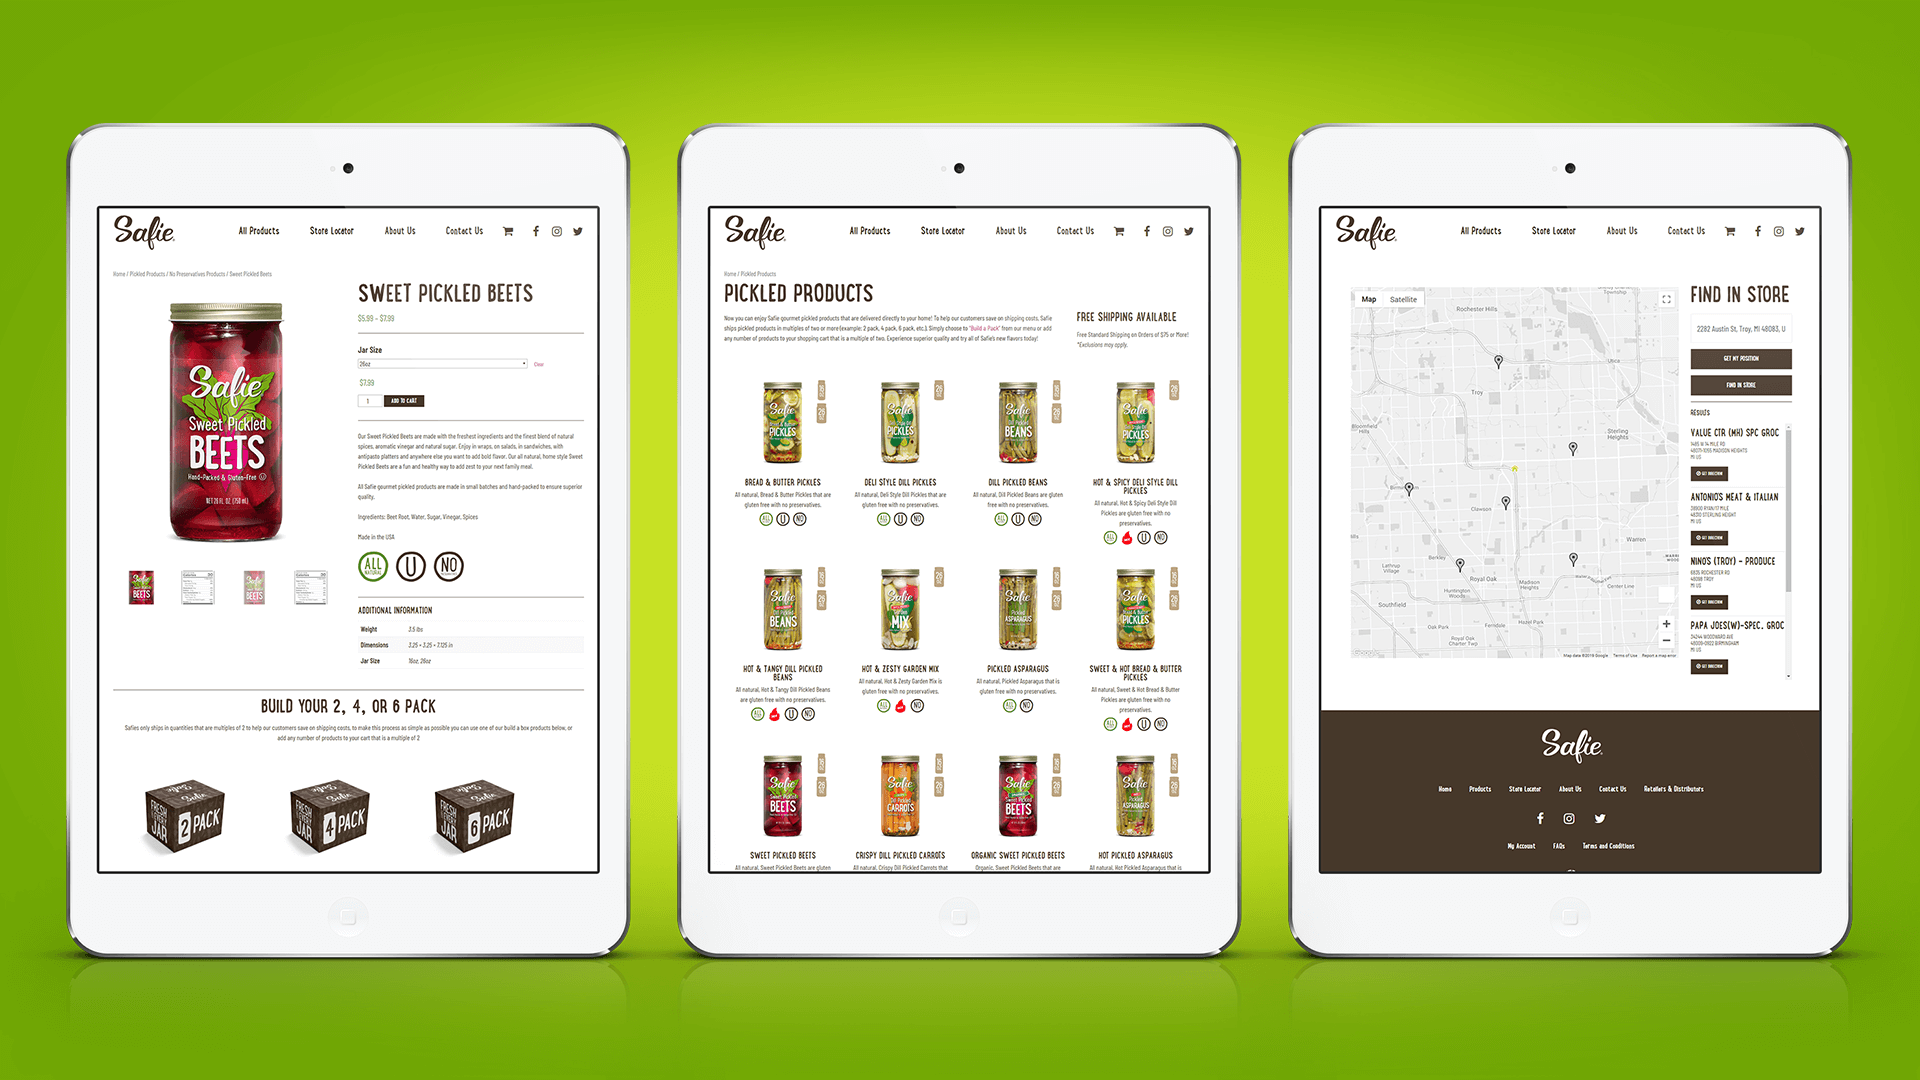 The new product menu, eCommerce store and store locator for Safies Specialty Foods